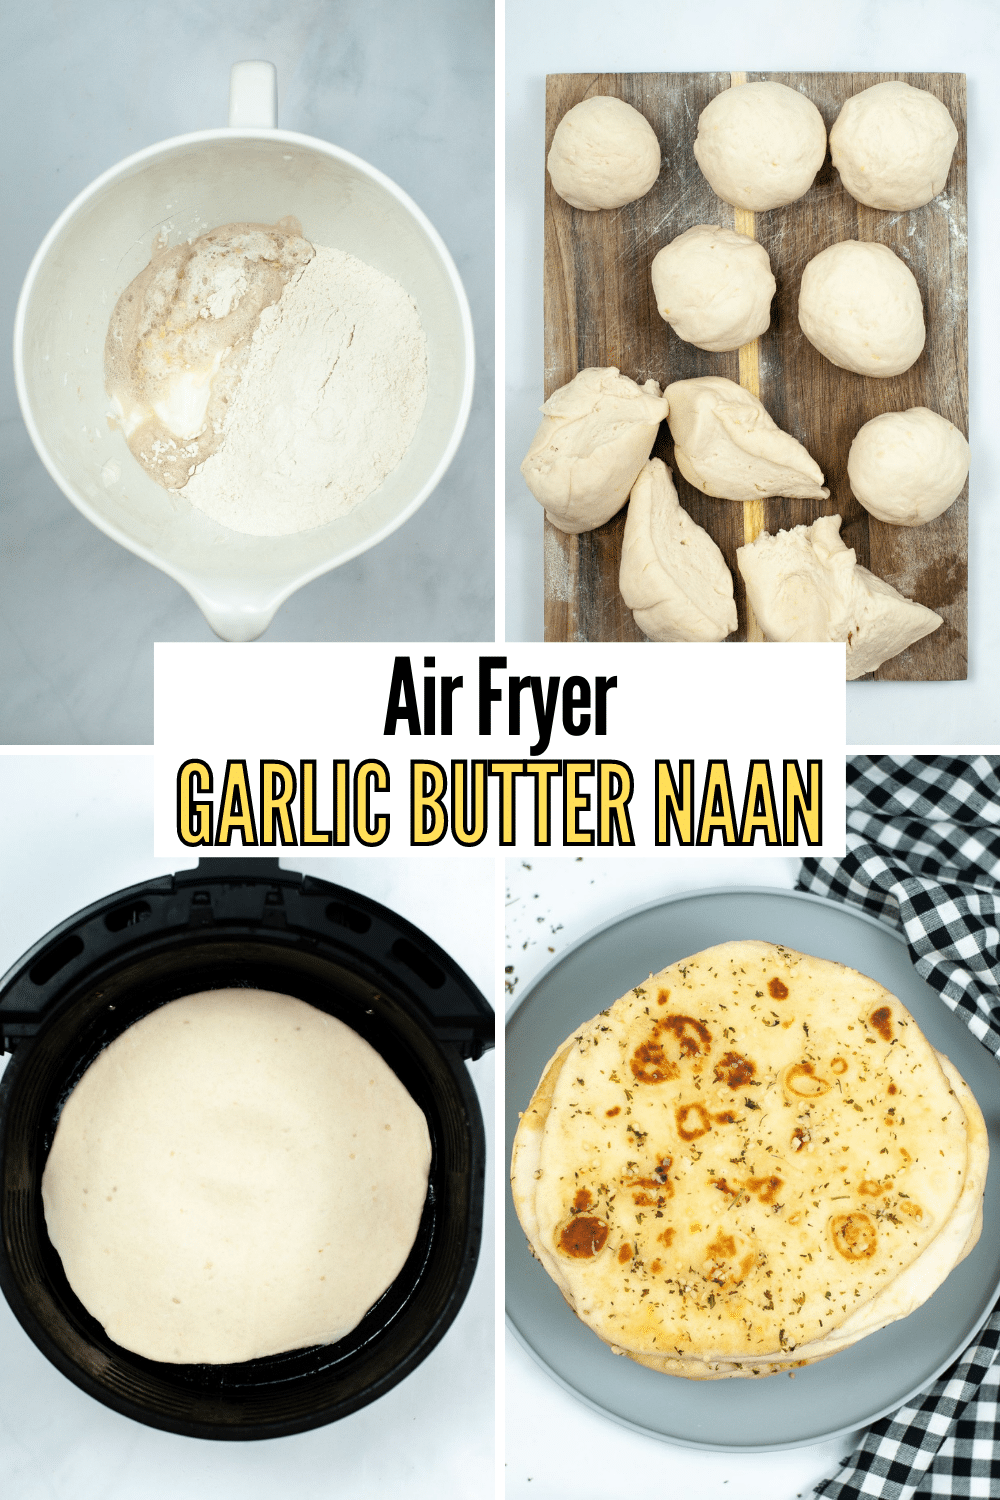 Air Fryer Naan is a soft, doughy homemade bread brushed with delicious garlic butter. It's perfect for dipping, pizzas or eating as it is. #airfryer #naan #homemadebread #recipe #garlic via @wondermomwannab